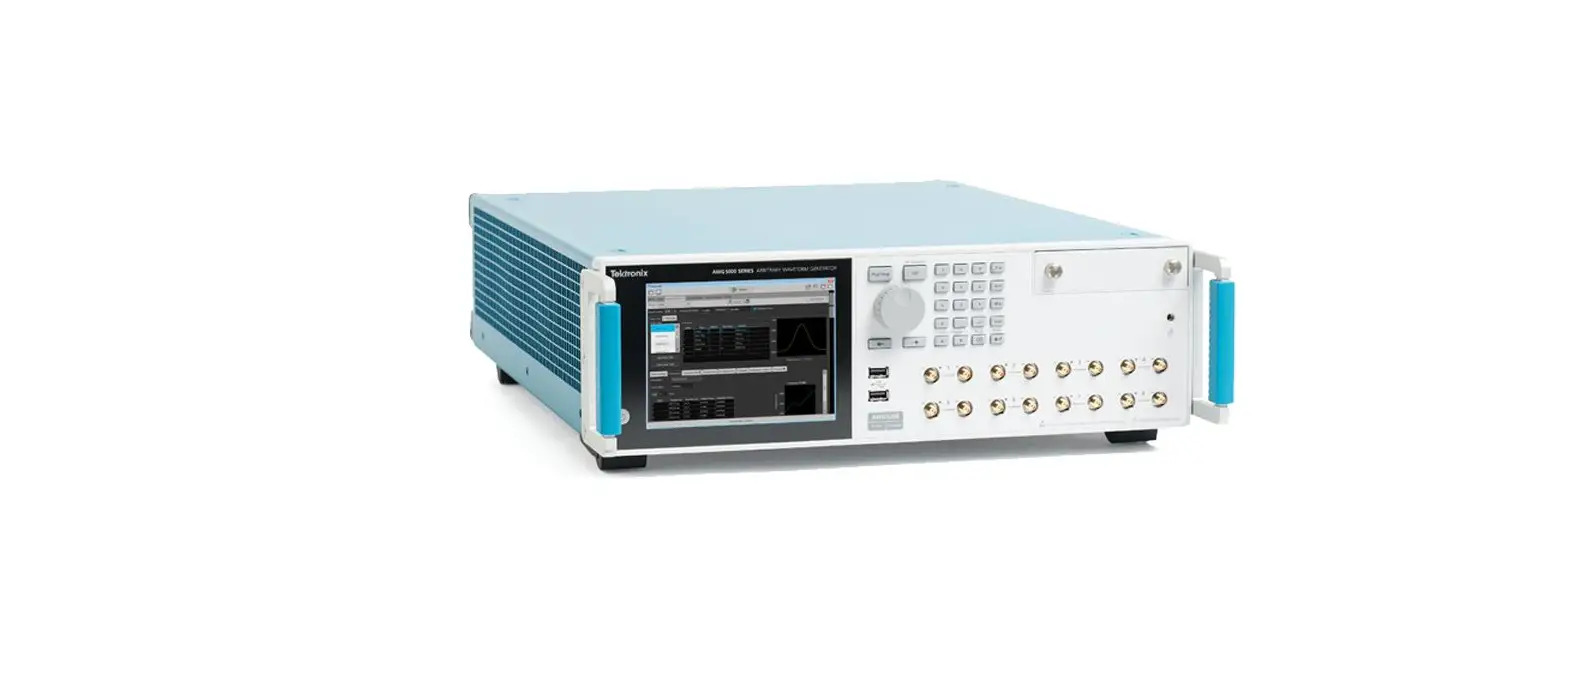 AWG5200 Series